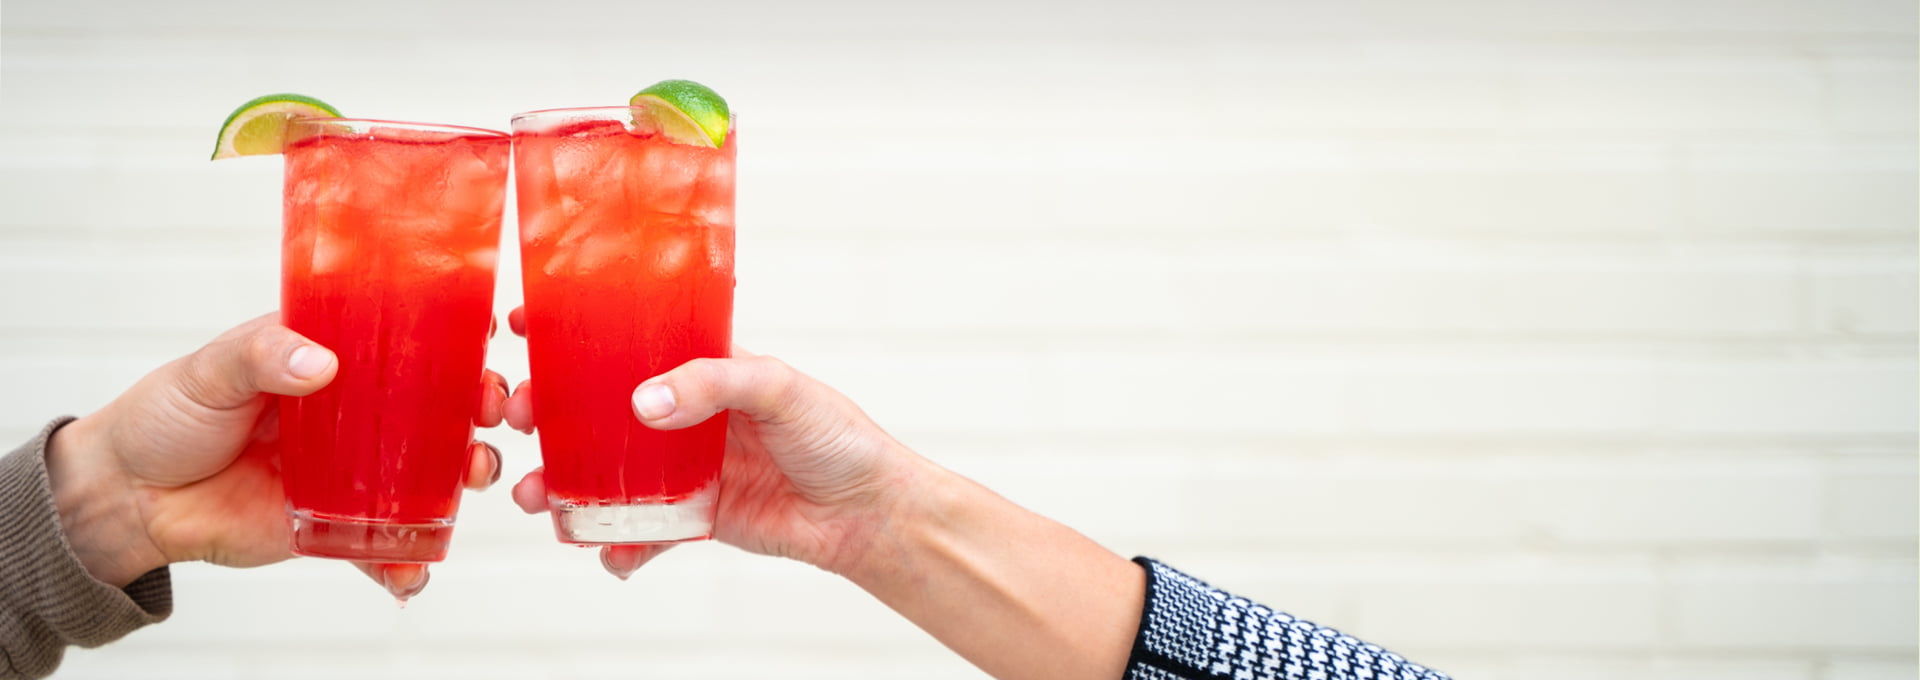 Cheers! Friends raise glasses of fresh Pomegranate Pear Punch